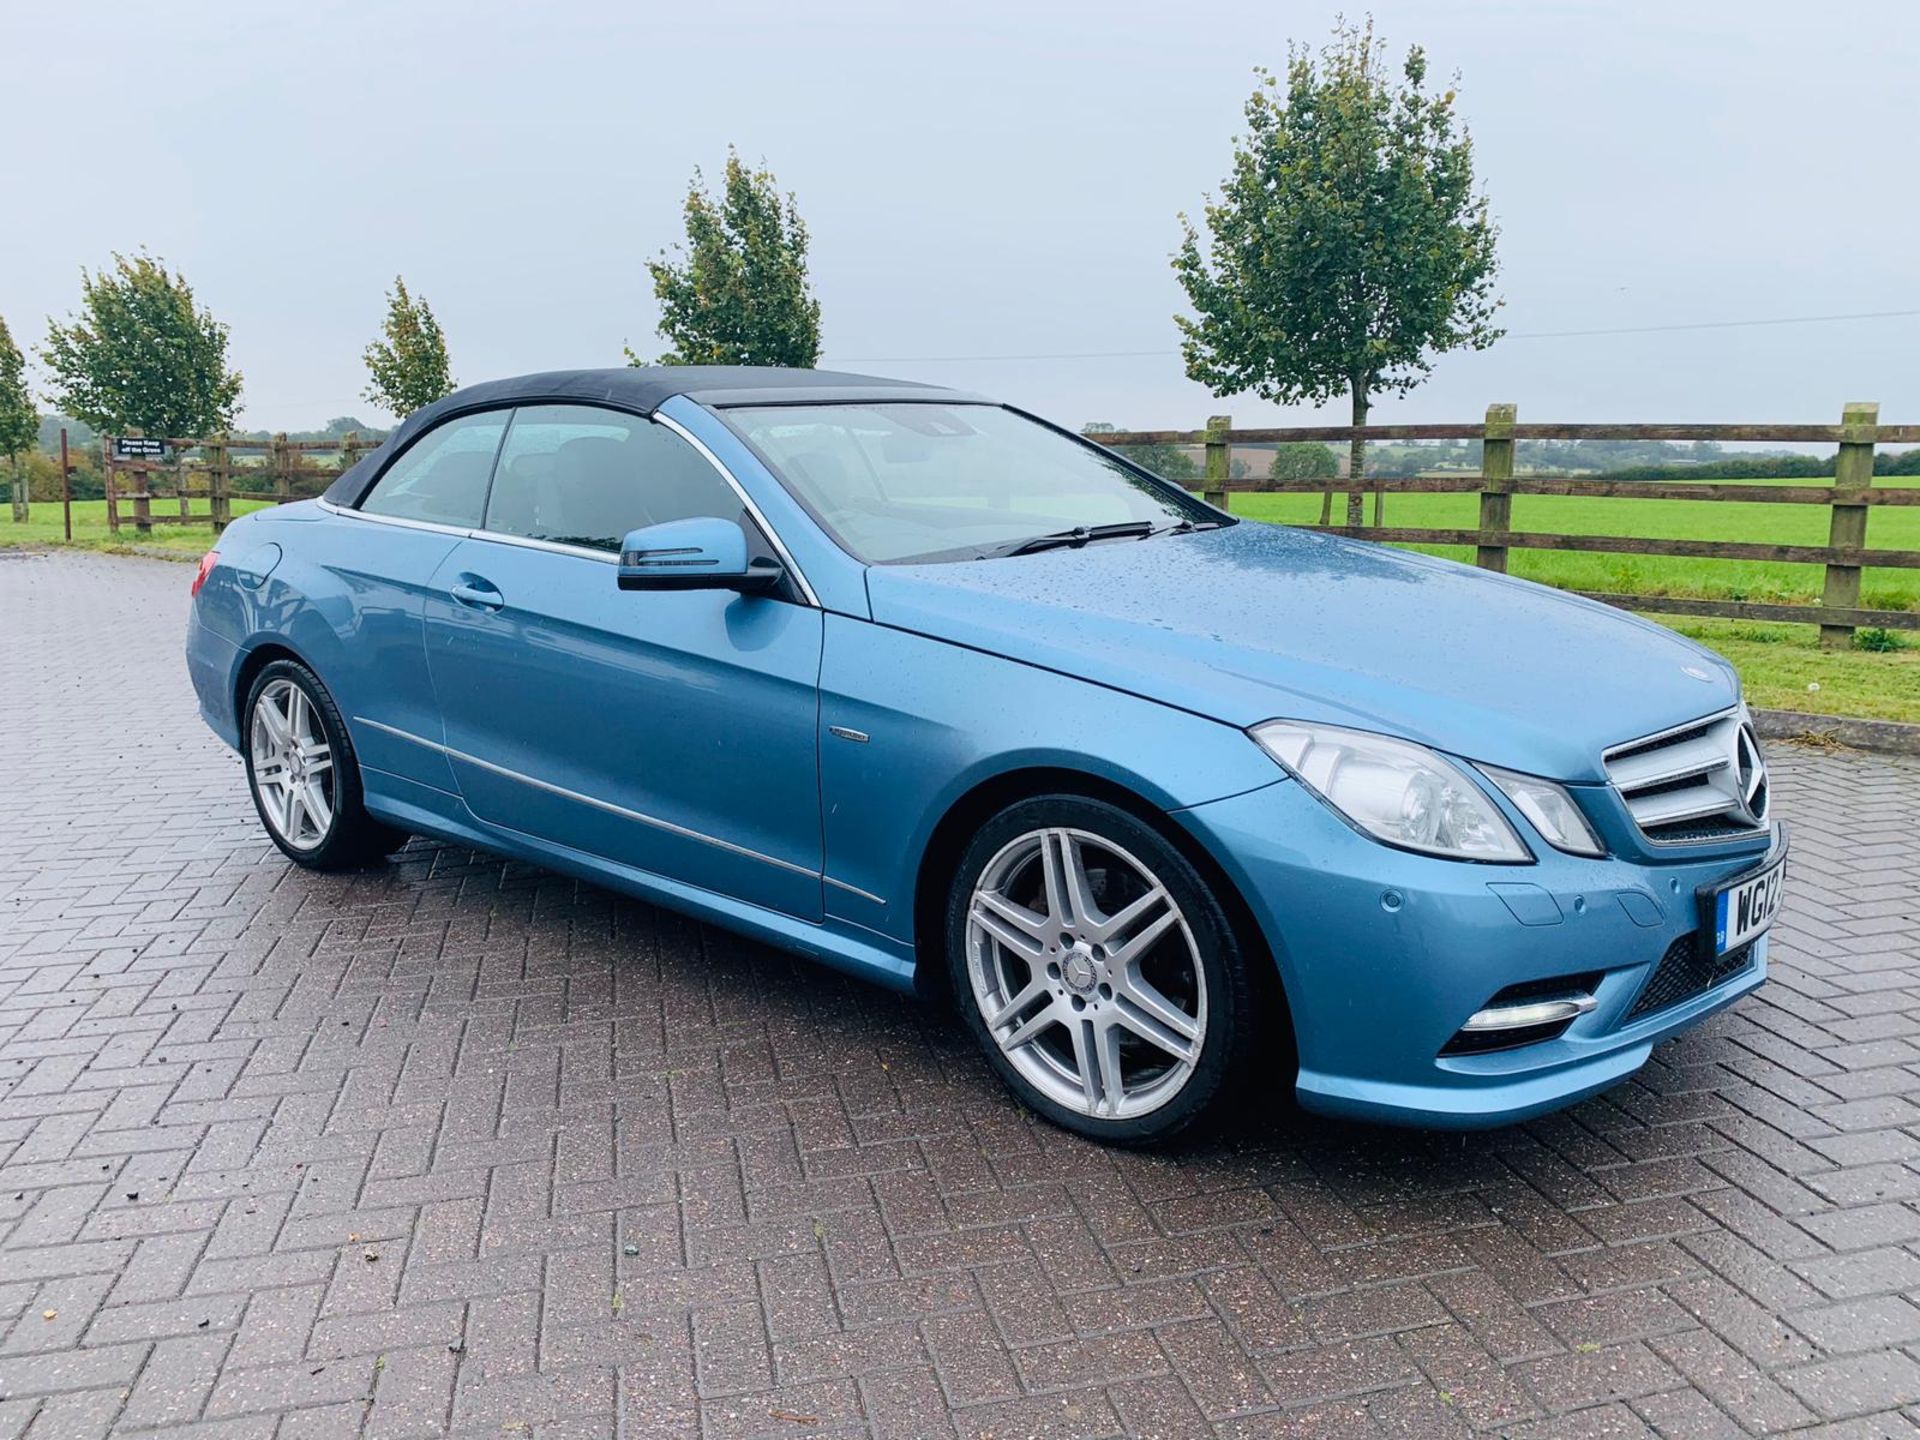 (RESERVE MET) Mercedes E220 Sport 2.1 CDI Convertible - 2012 12 Reg - Black Leather - Heated Seats - Image 4 of 17